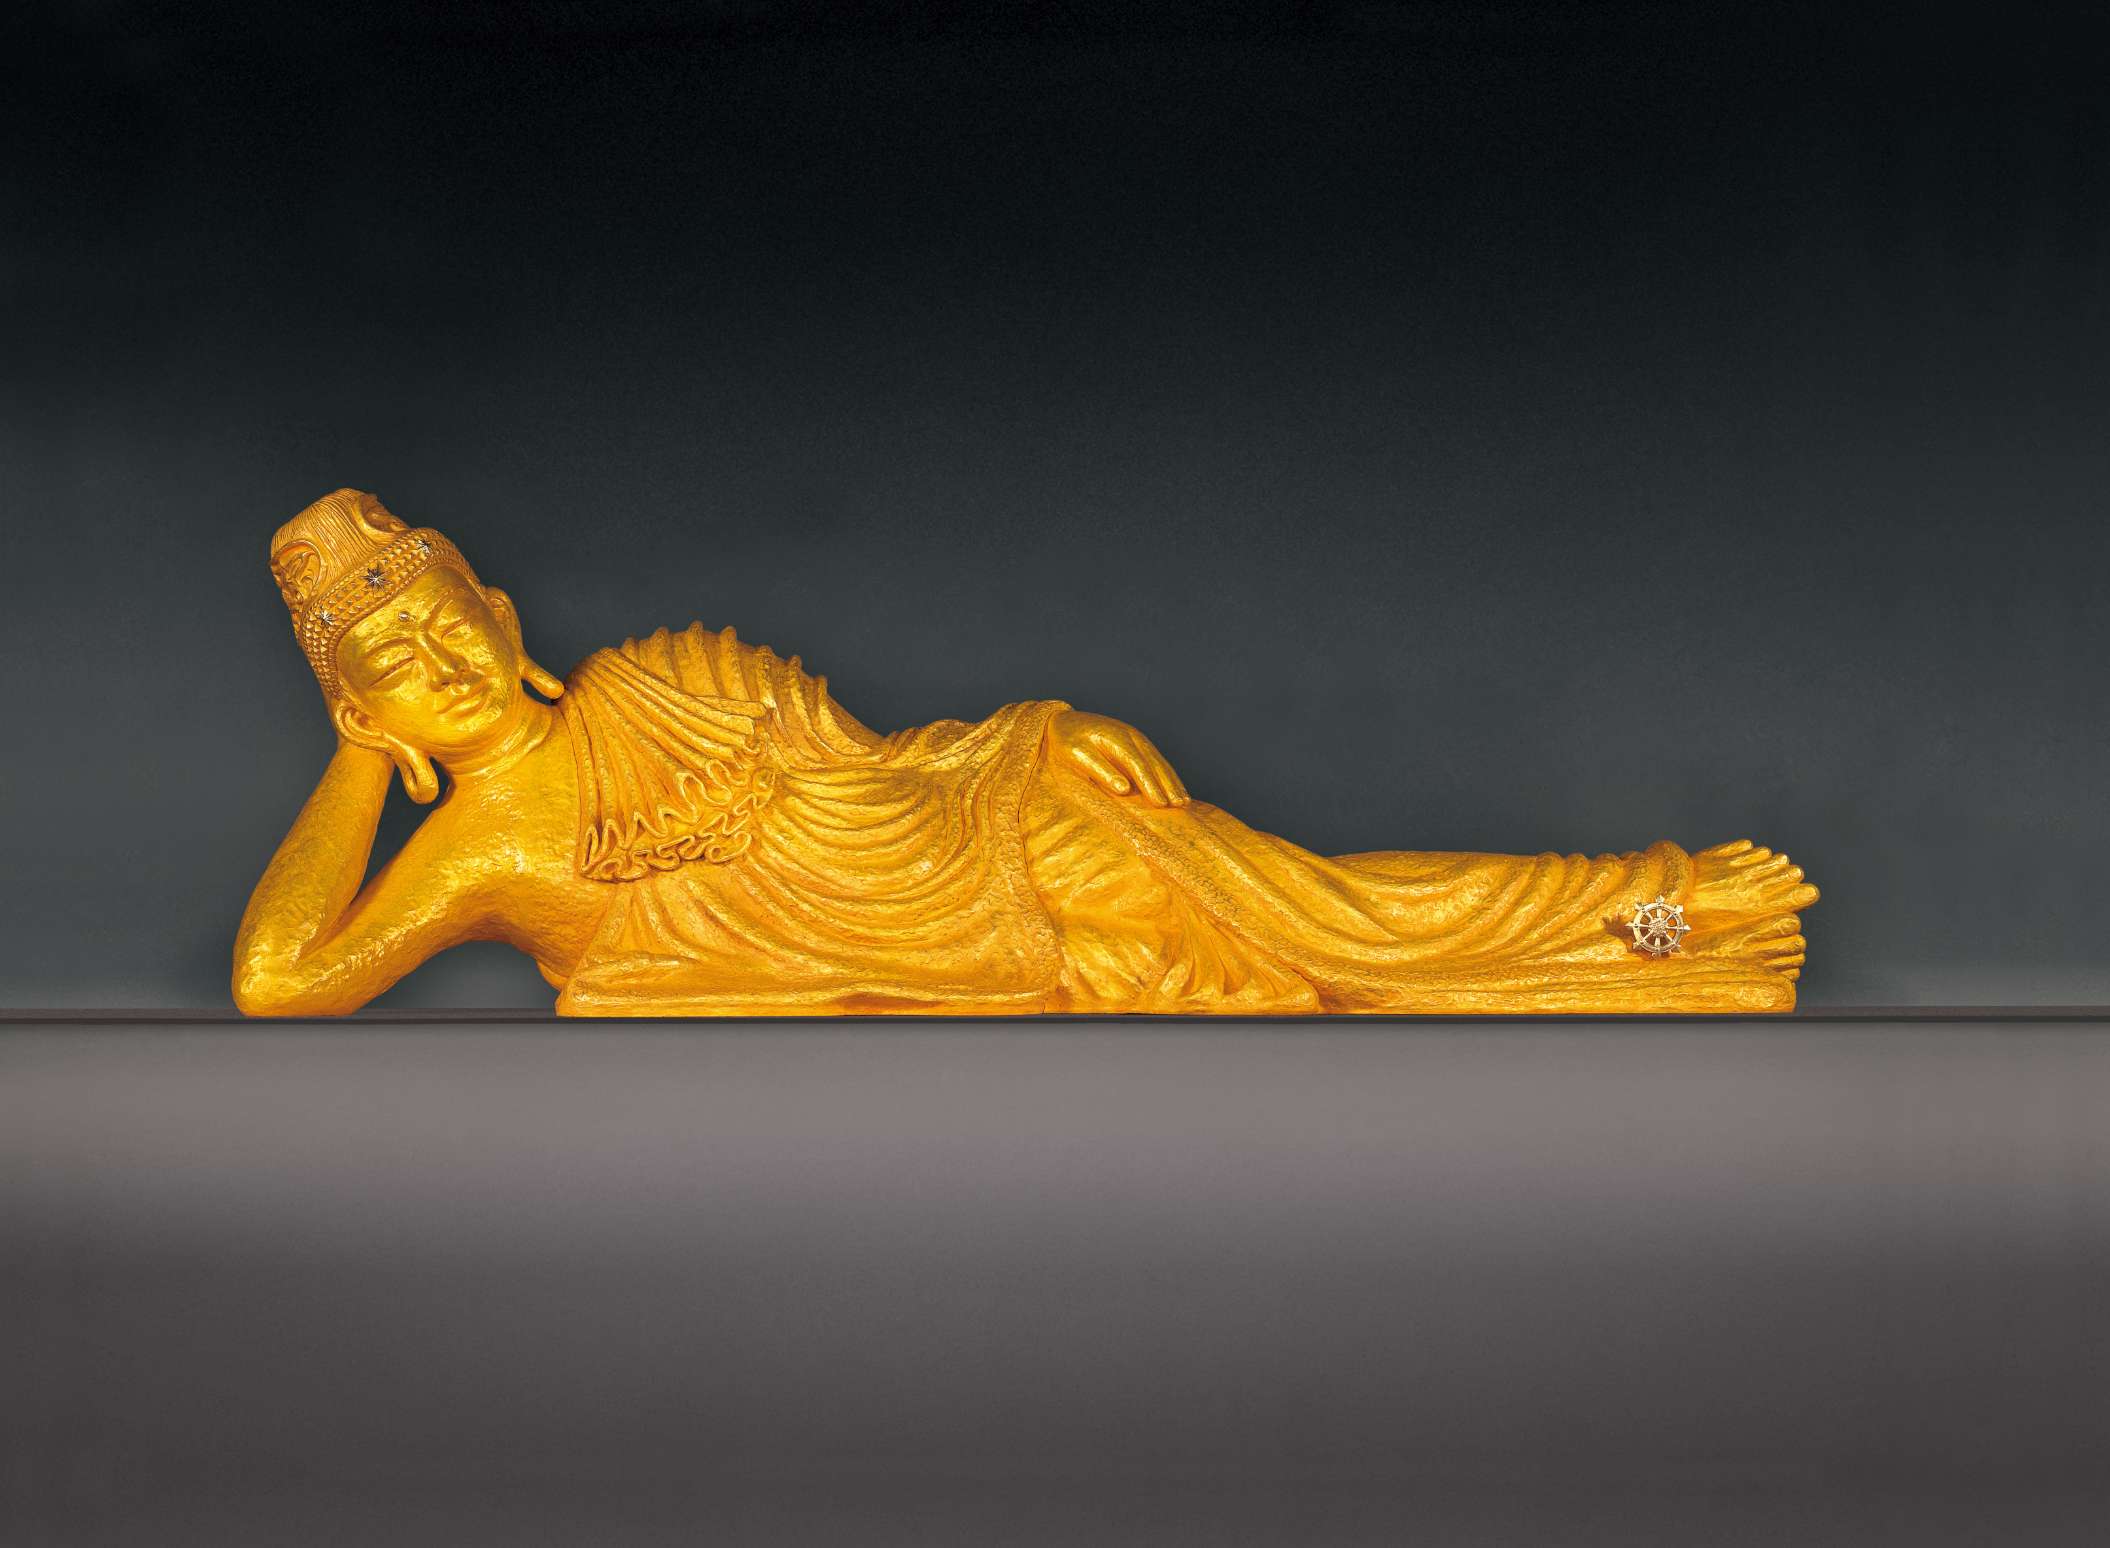 A golden colored statue of Buddha laying on his right side, head propped up by his right arm, his left arm resting on his left side, against a gradient gray background.